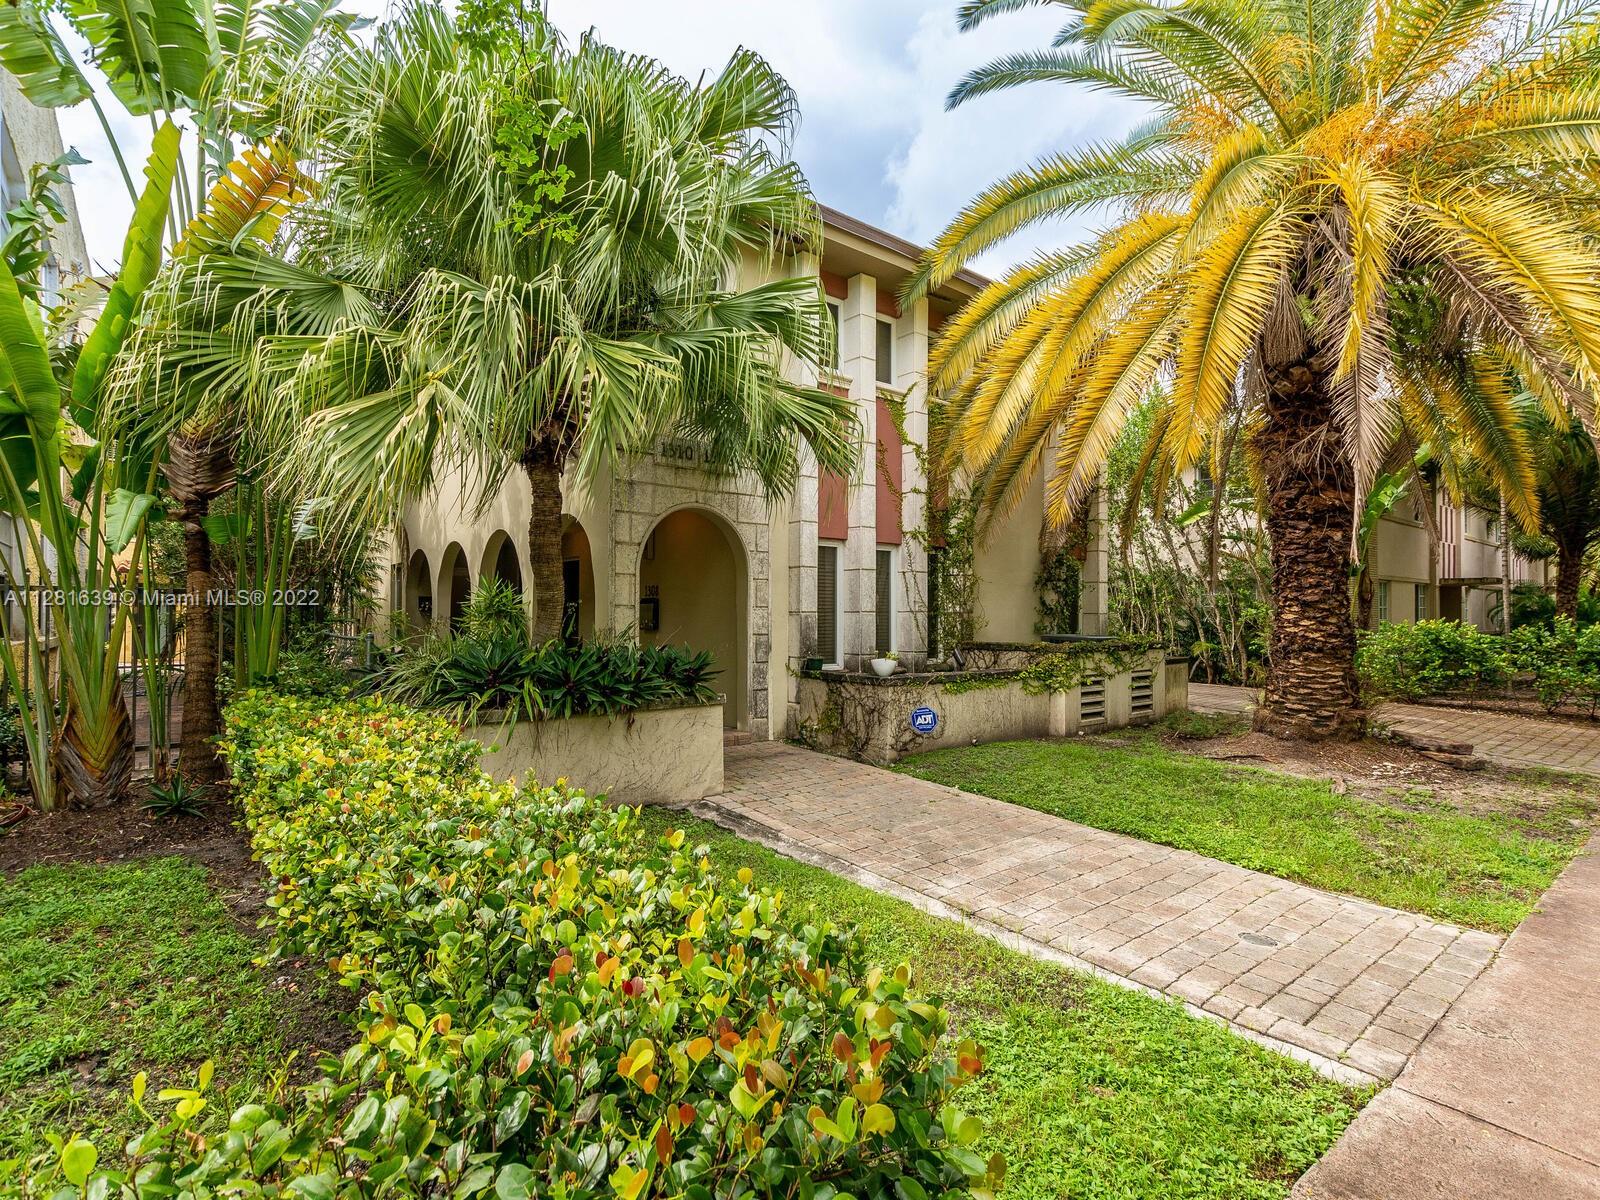 ABSOLUTELY STUNNING, REMODELED 3 BR/2.5 BATH MODERN VILLA IN THE HEART OF CORAL GABLES. 24X24 PORCELAIN TILE THROUGHOUT & WOOD FLOORS IN MASTER SUITE, EXOTIC "CALACATTA GOLD" MARBLE & COUNTERTOP IN MASTER BATH. THE HOME FEATURES WOODEN STAIRS W/SS RAILINGS. STATE -OF-THE- ART KITCHEN W/SS APPLIANCES & GRANITE COUNTERTOPS. IMPACT WINDOWS & DOORS. DESIGNER BATH & LIGHTING FIXTURES, AS WELL AS AN INTERIOR PEACEFUL WALL FOUNTAIN. THE HOME HAS GREAT PARKING, TWO SPOTS PER UNIT + STREET PARKING FOR GUESTS. WALKING DISTANCE TO THE BEST RESTAURANTS AND HOTSPOTS IN COCONUT GROVE.